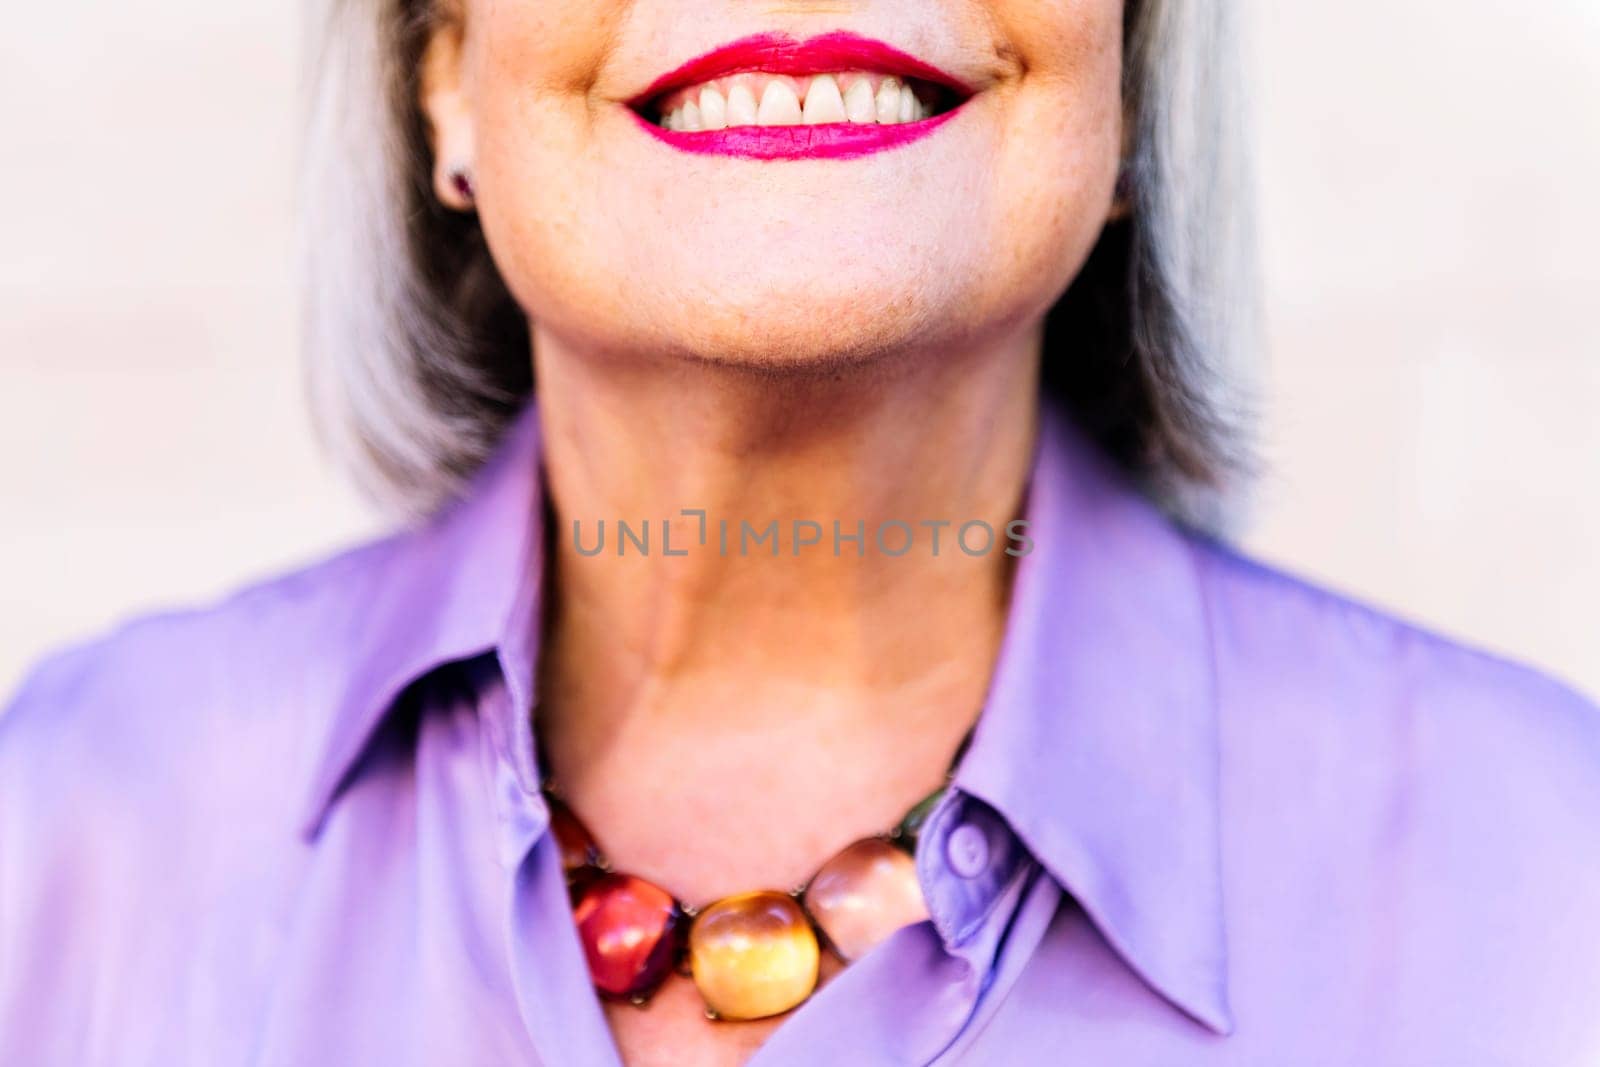 detail of the mouth of a nice senior woman smiling showing her teeth, concept of happiness of elderly people and active lifestyle